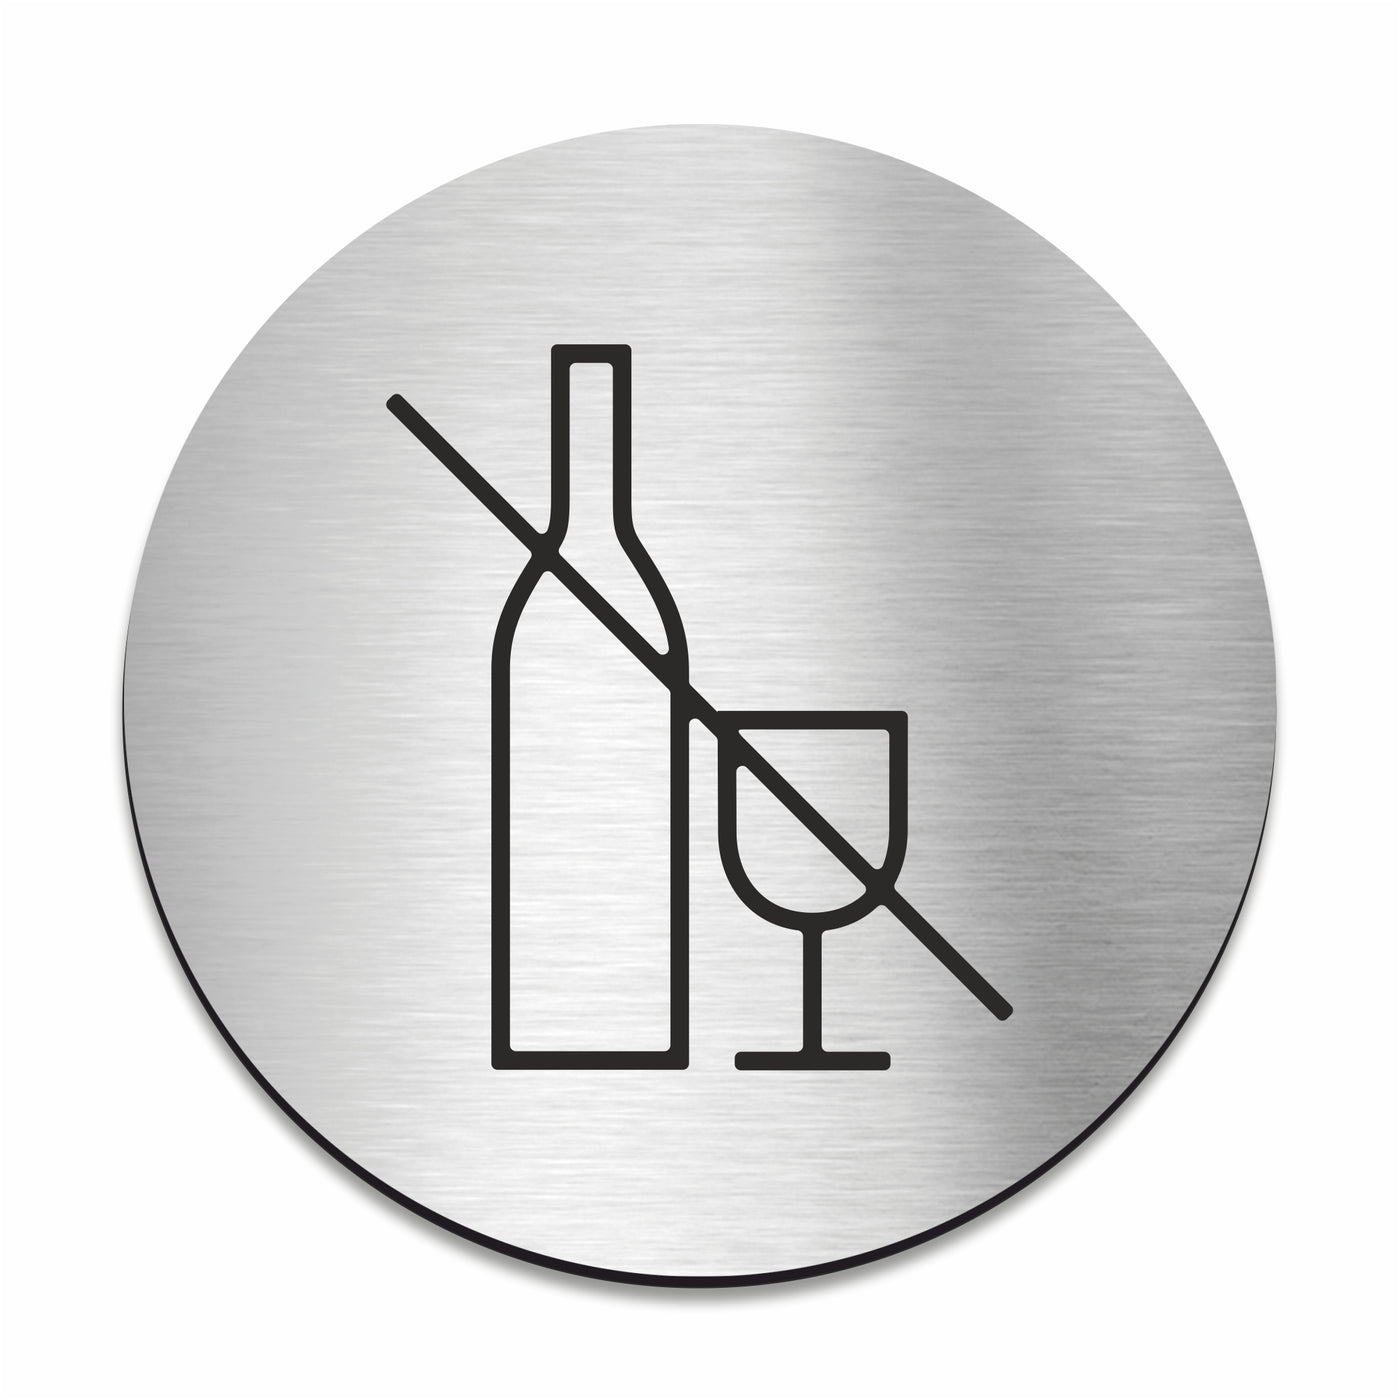 No Alcohol On Premises Sign | Alcohol Prohibition Sign - Stainless steel